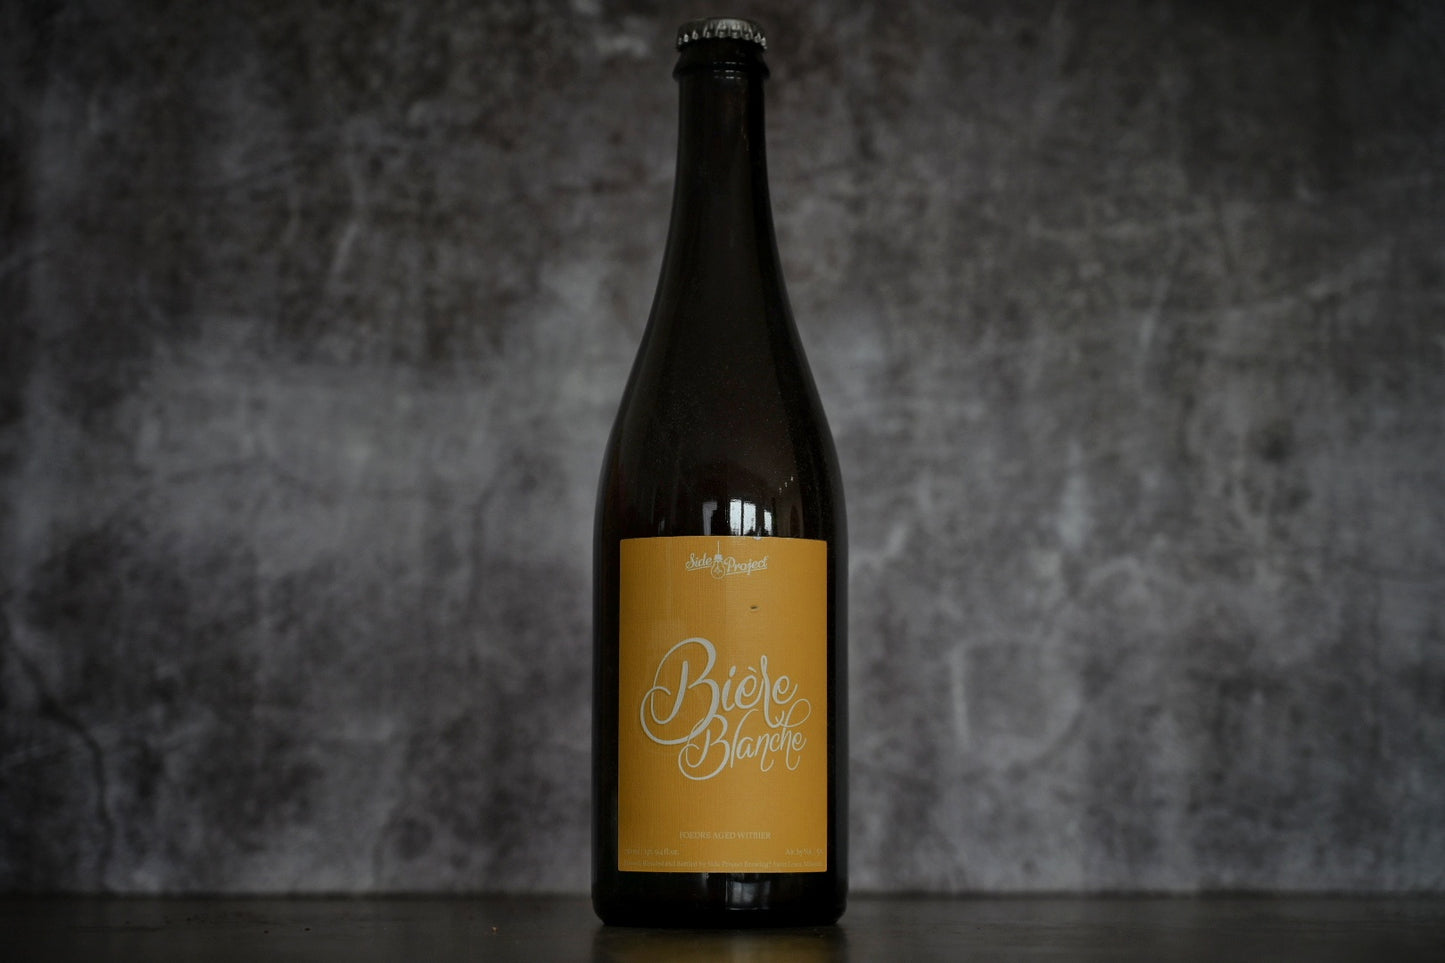 Side Project - Bière Blanche - 10 Year